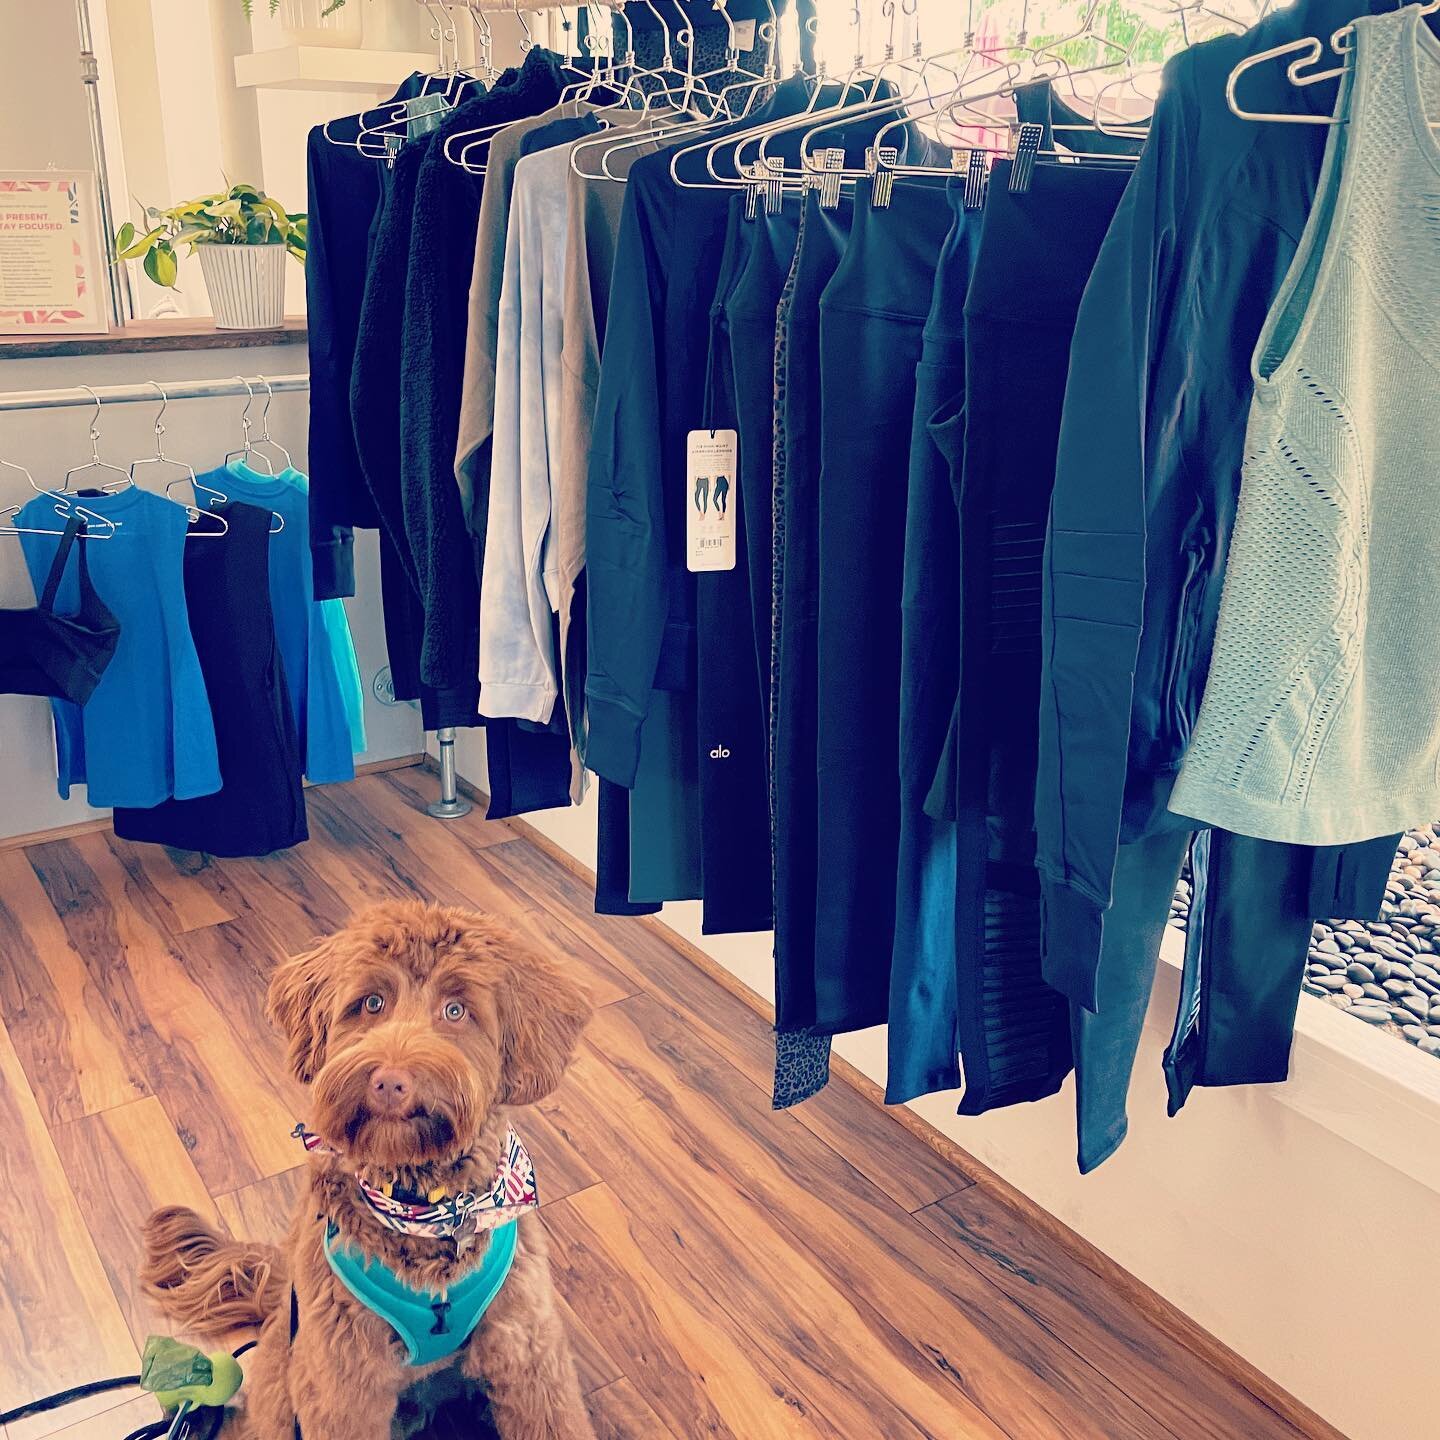 Ready to revamp your workout wardrobe? LOTS of new retail from @aloyoga and more to come!🙌🏼
-
Checkout our must-haves in the boutique TODAY! Open for shopping this week. Today 8:30-1:30 pm, Wednesday 4:30-6:30 PM and over the weekend! 😃